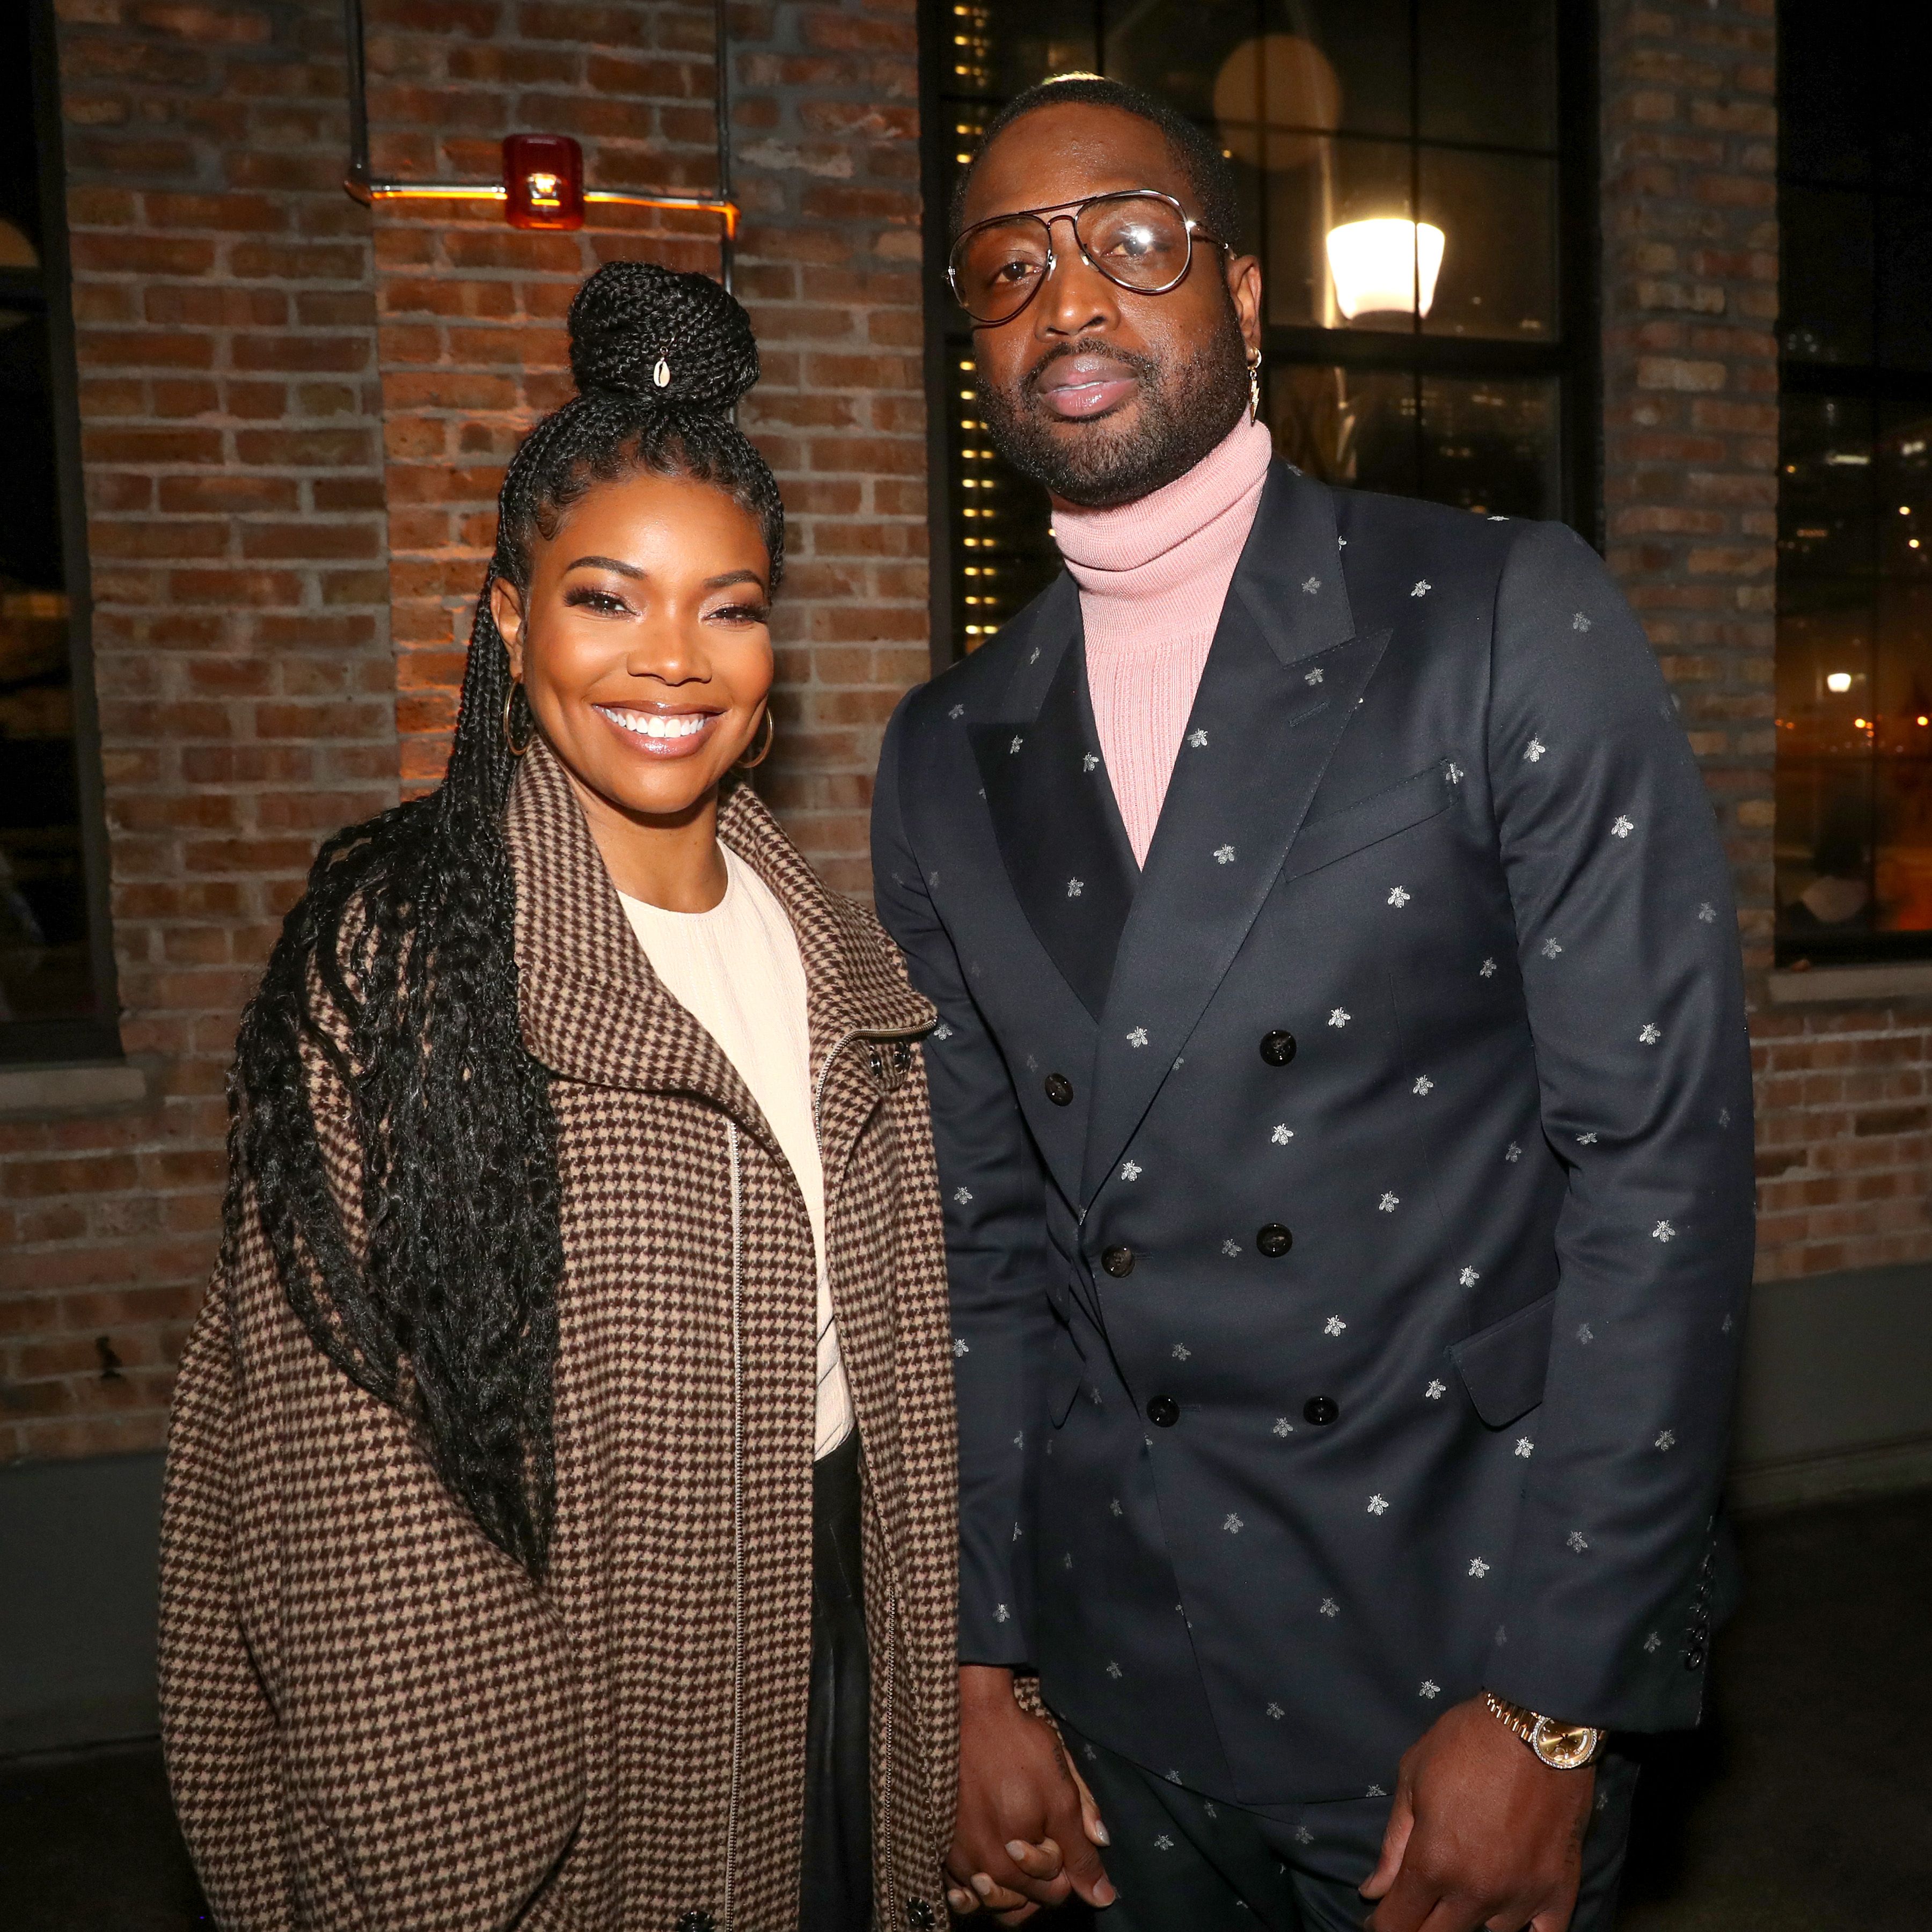 Gabrielle Union and Dwyane Wade at Stance Spades At NBA All-Star 2020 at City Hall on February 15, 2020 | Photo: Getty Images